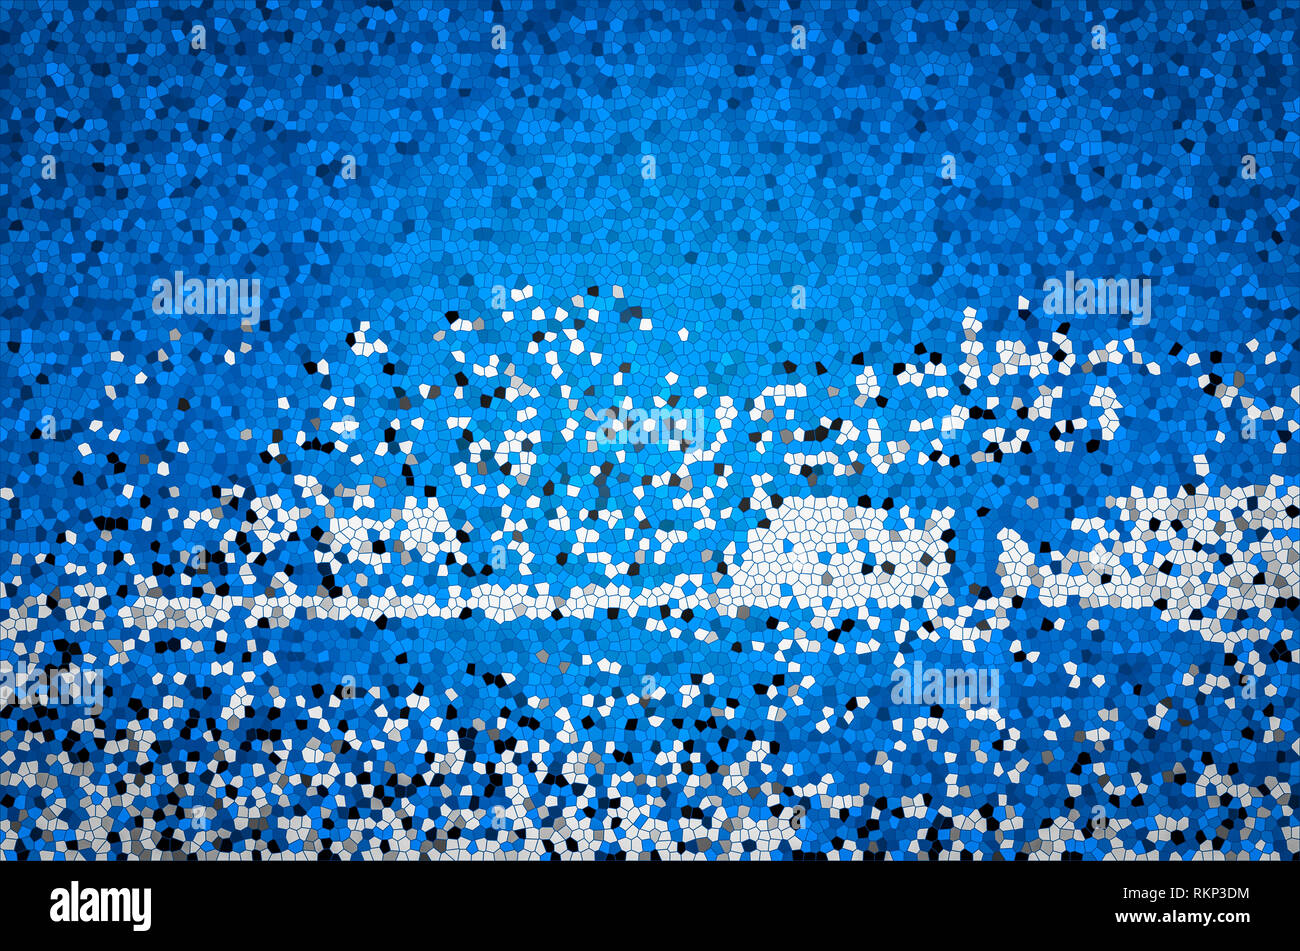 Abstract blue & white background showing cold or winter season. Stock Photo